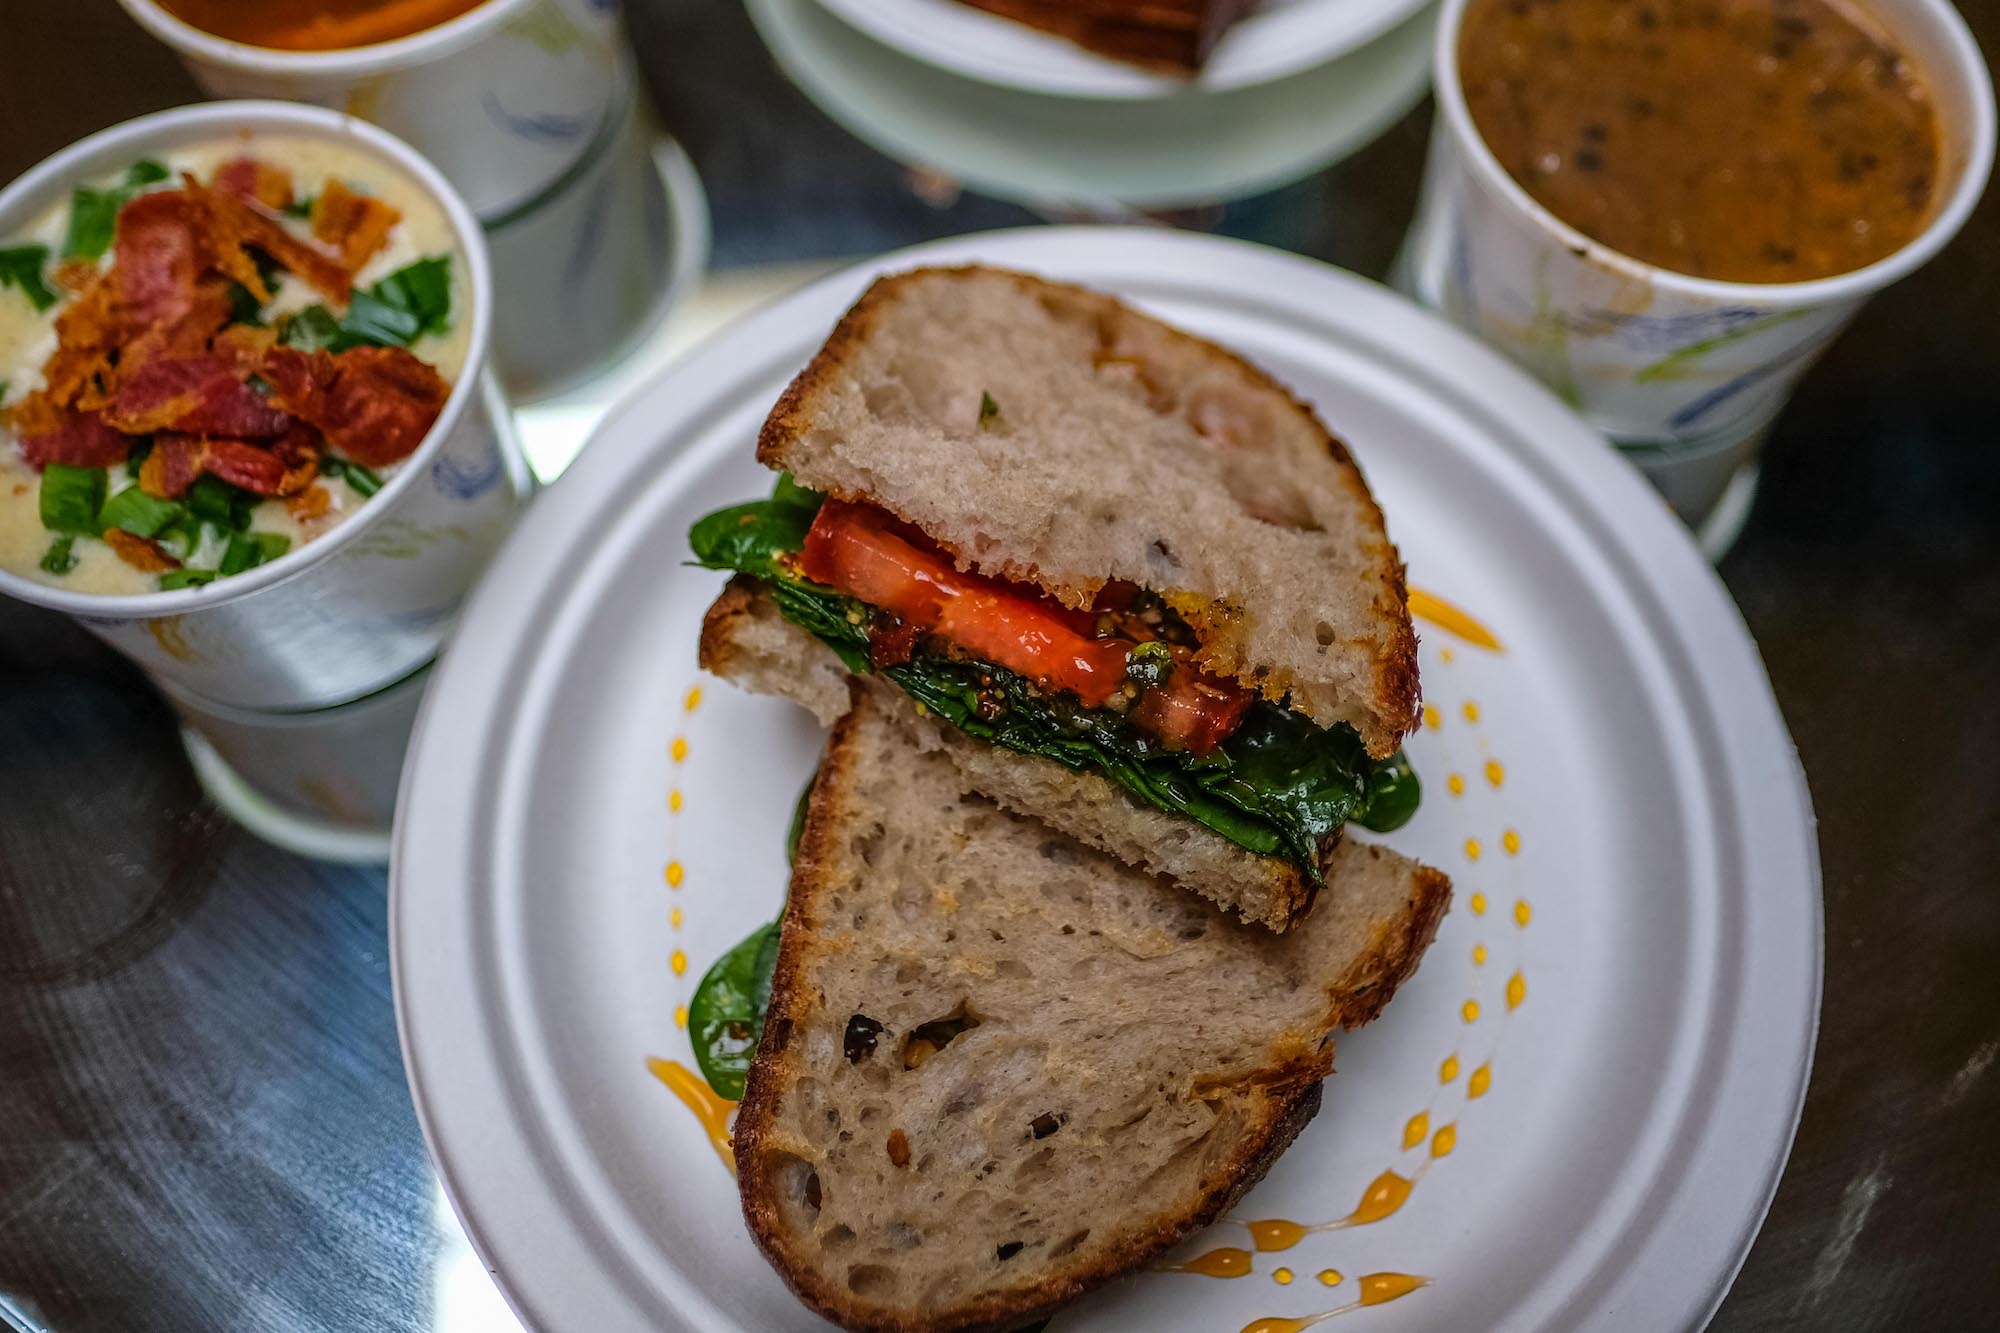 A vegan sandwich called The Gunther sits on a plate surrounded by various soups.